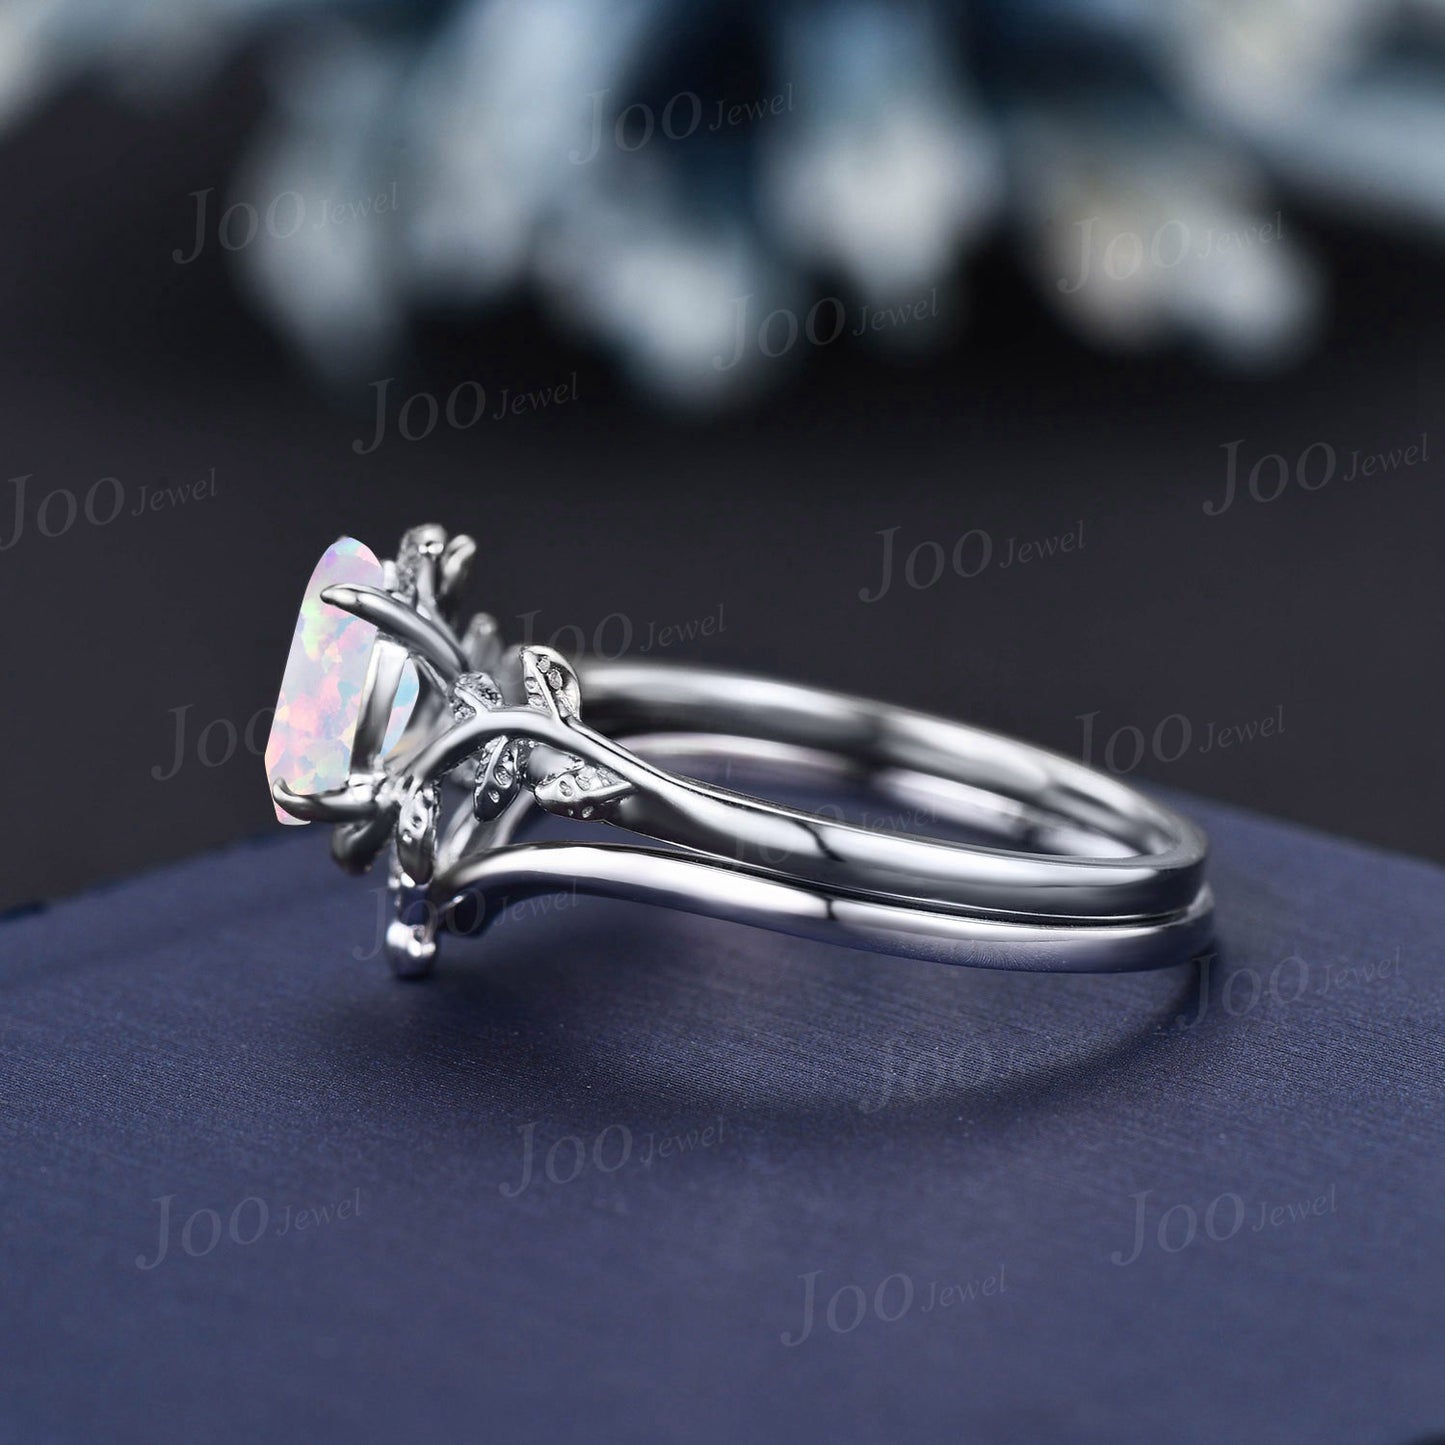 Nature Inspired White Fire Opal Solitaire Ring Set Sterling Silver Unique Vintage 1.5ct Oval Branch Twig Leaf Opal Honey Bee Wedding Ring